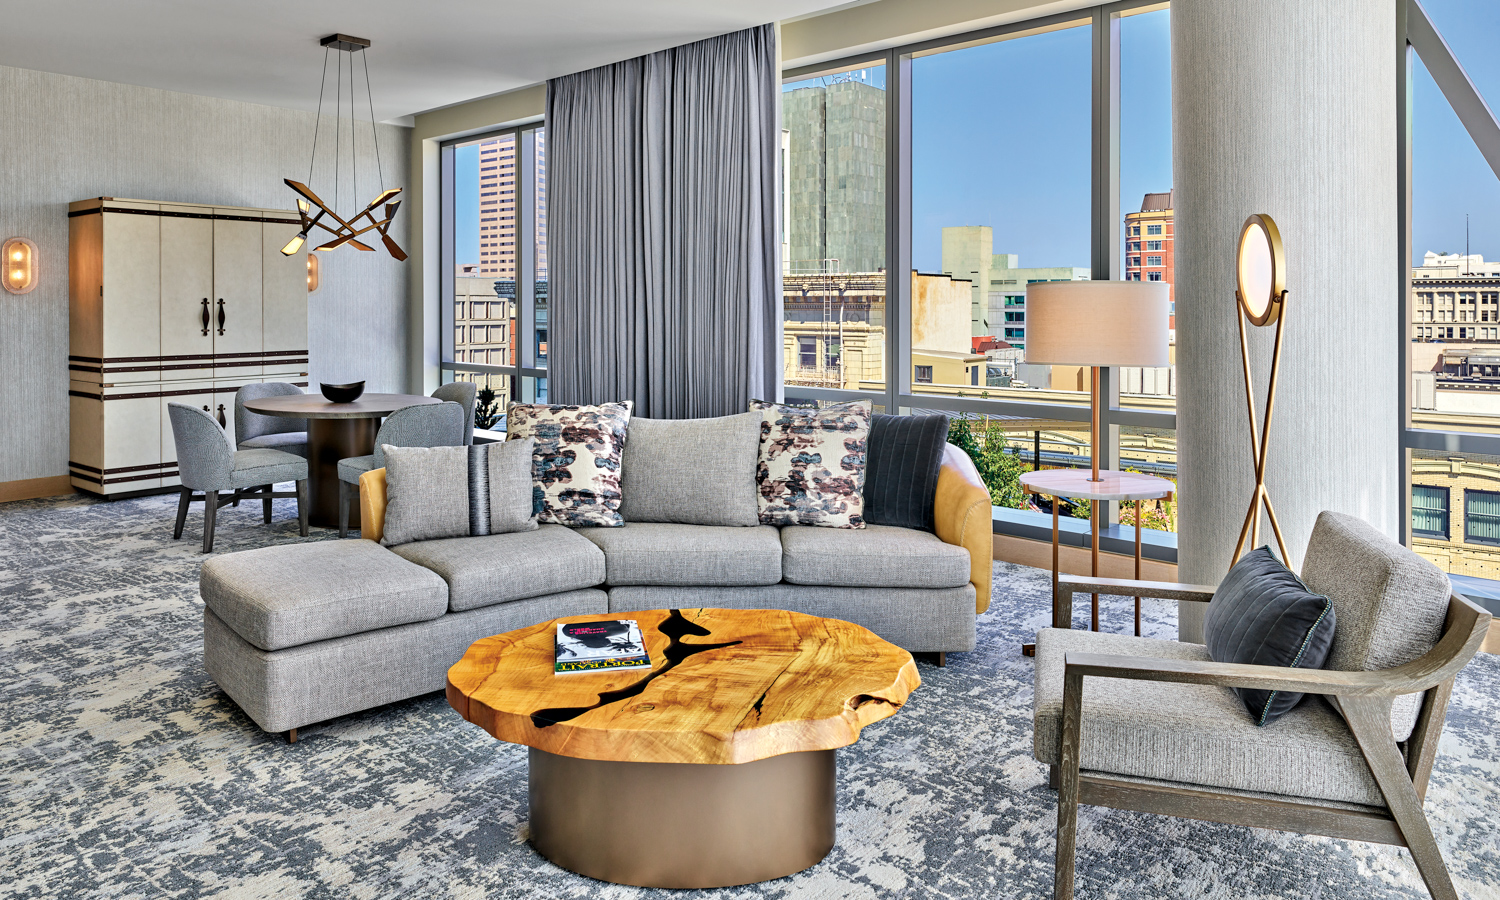 Ritz-Carlton suite with curved gray sofa and armchair around a wood coffee table in front of a wall of windows